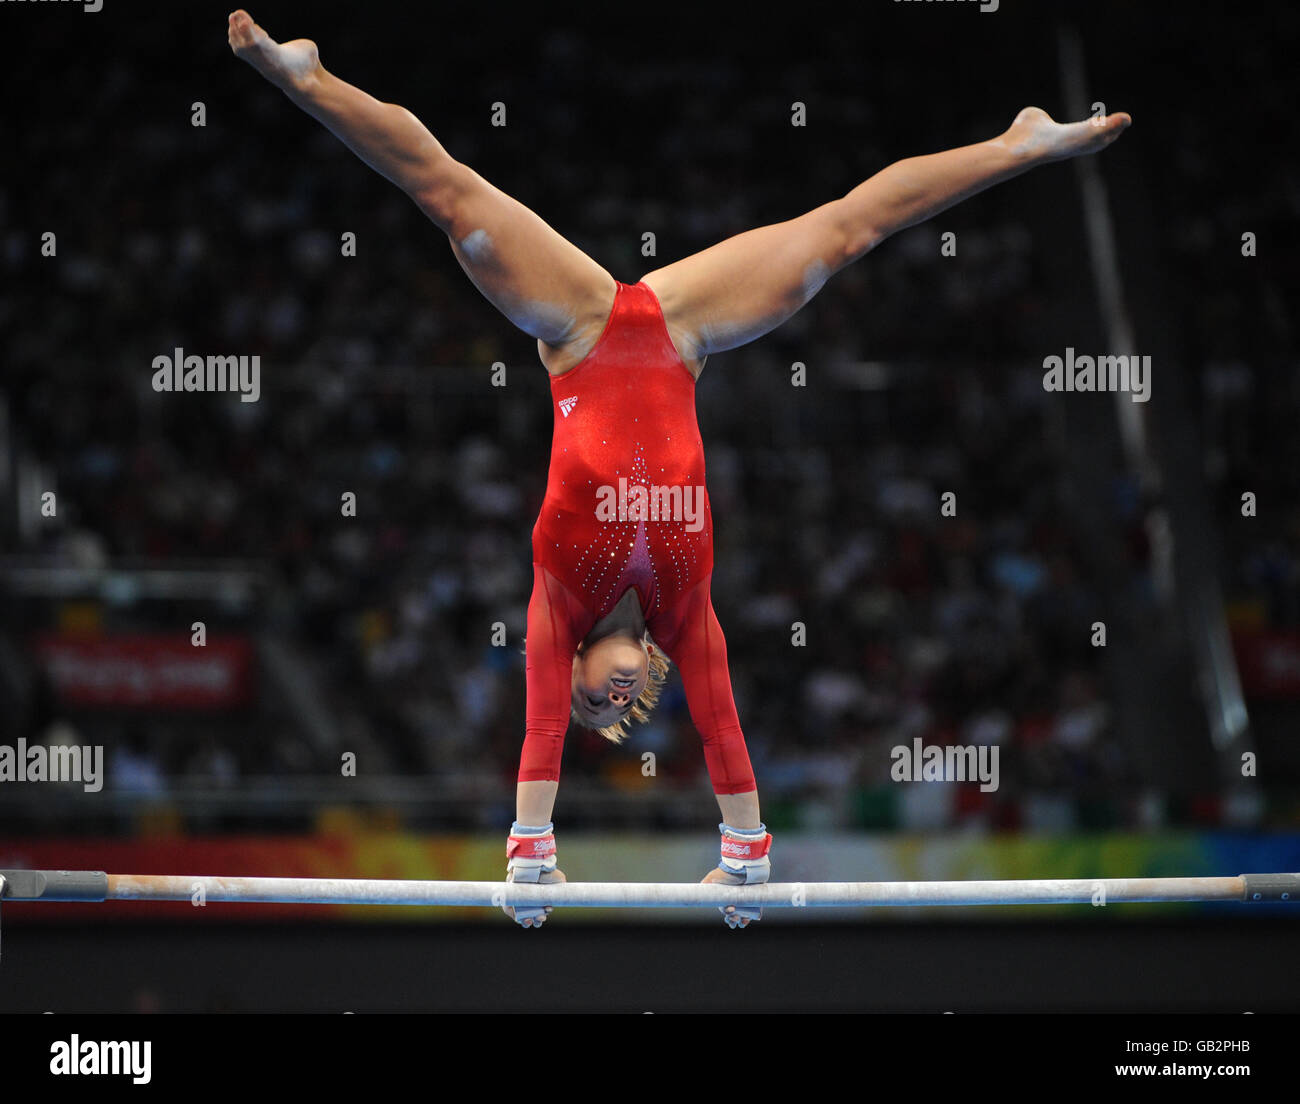 USA's Shawn Johnson in action on the A symmetrical bars in the Women's Individual All Round Final at Beijing's National Indoor Stadium Stock Photo